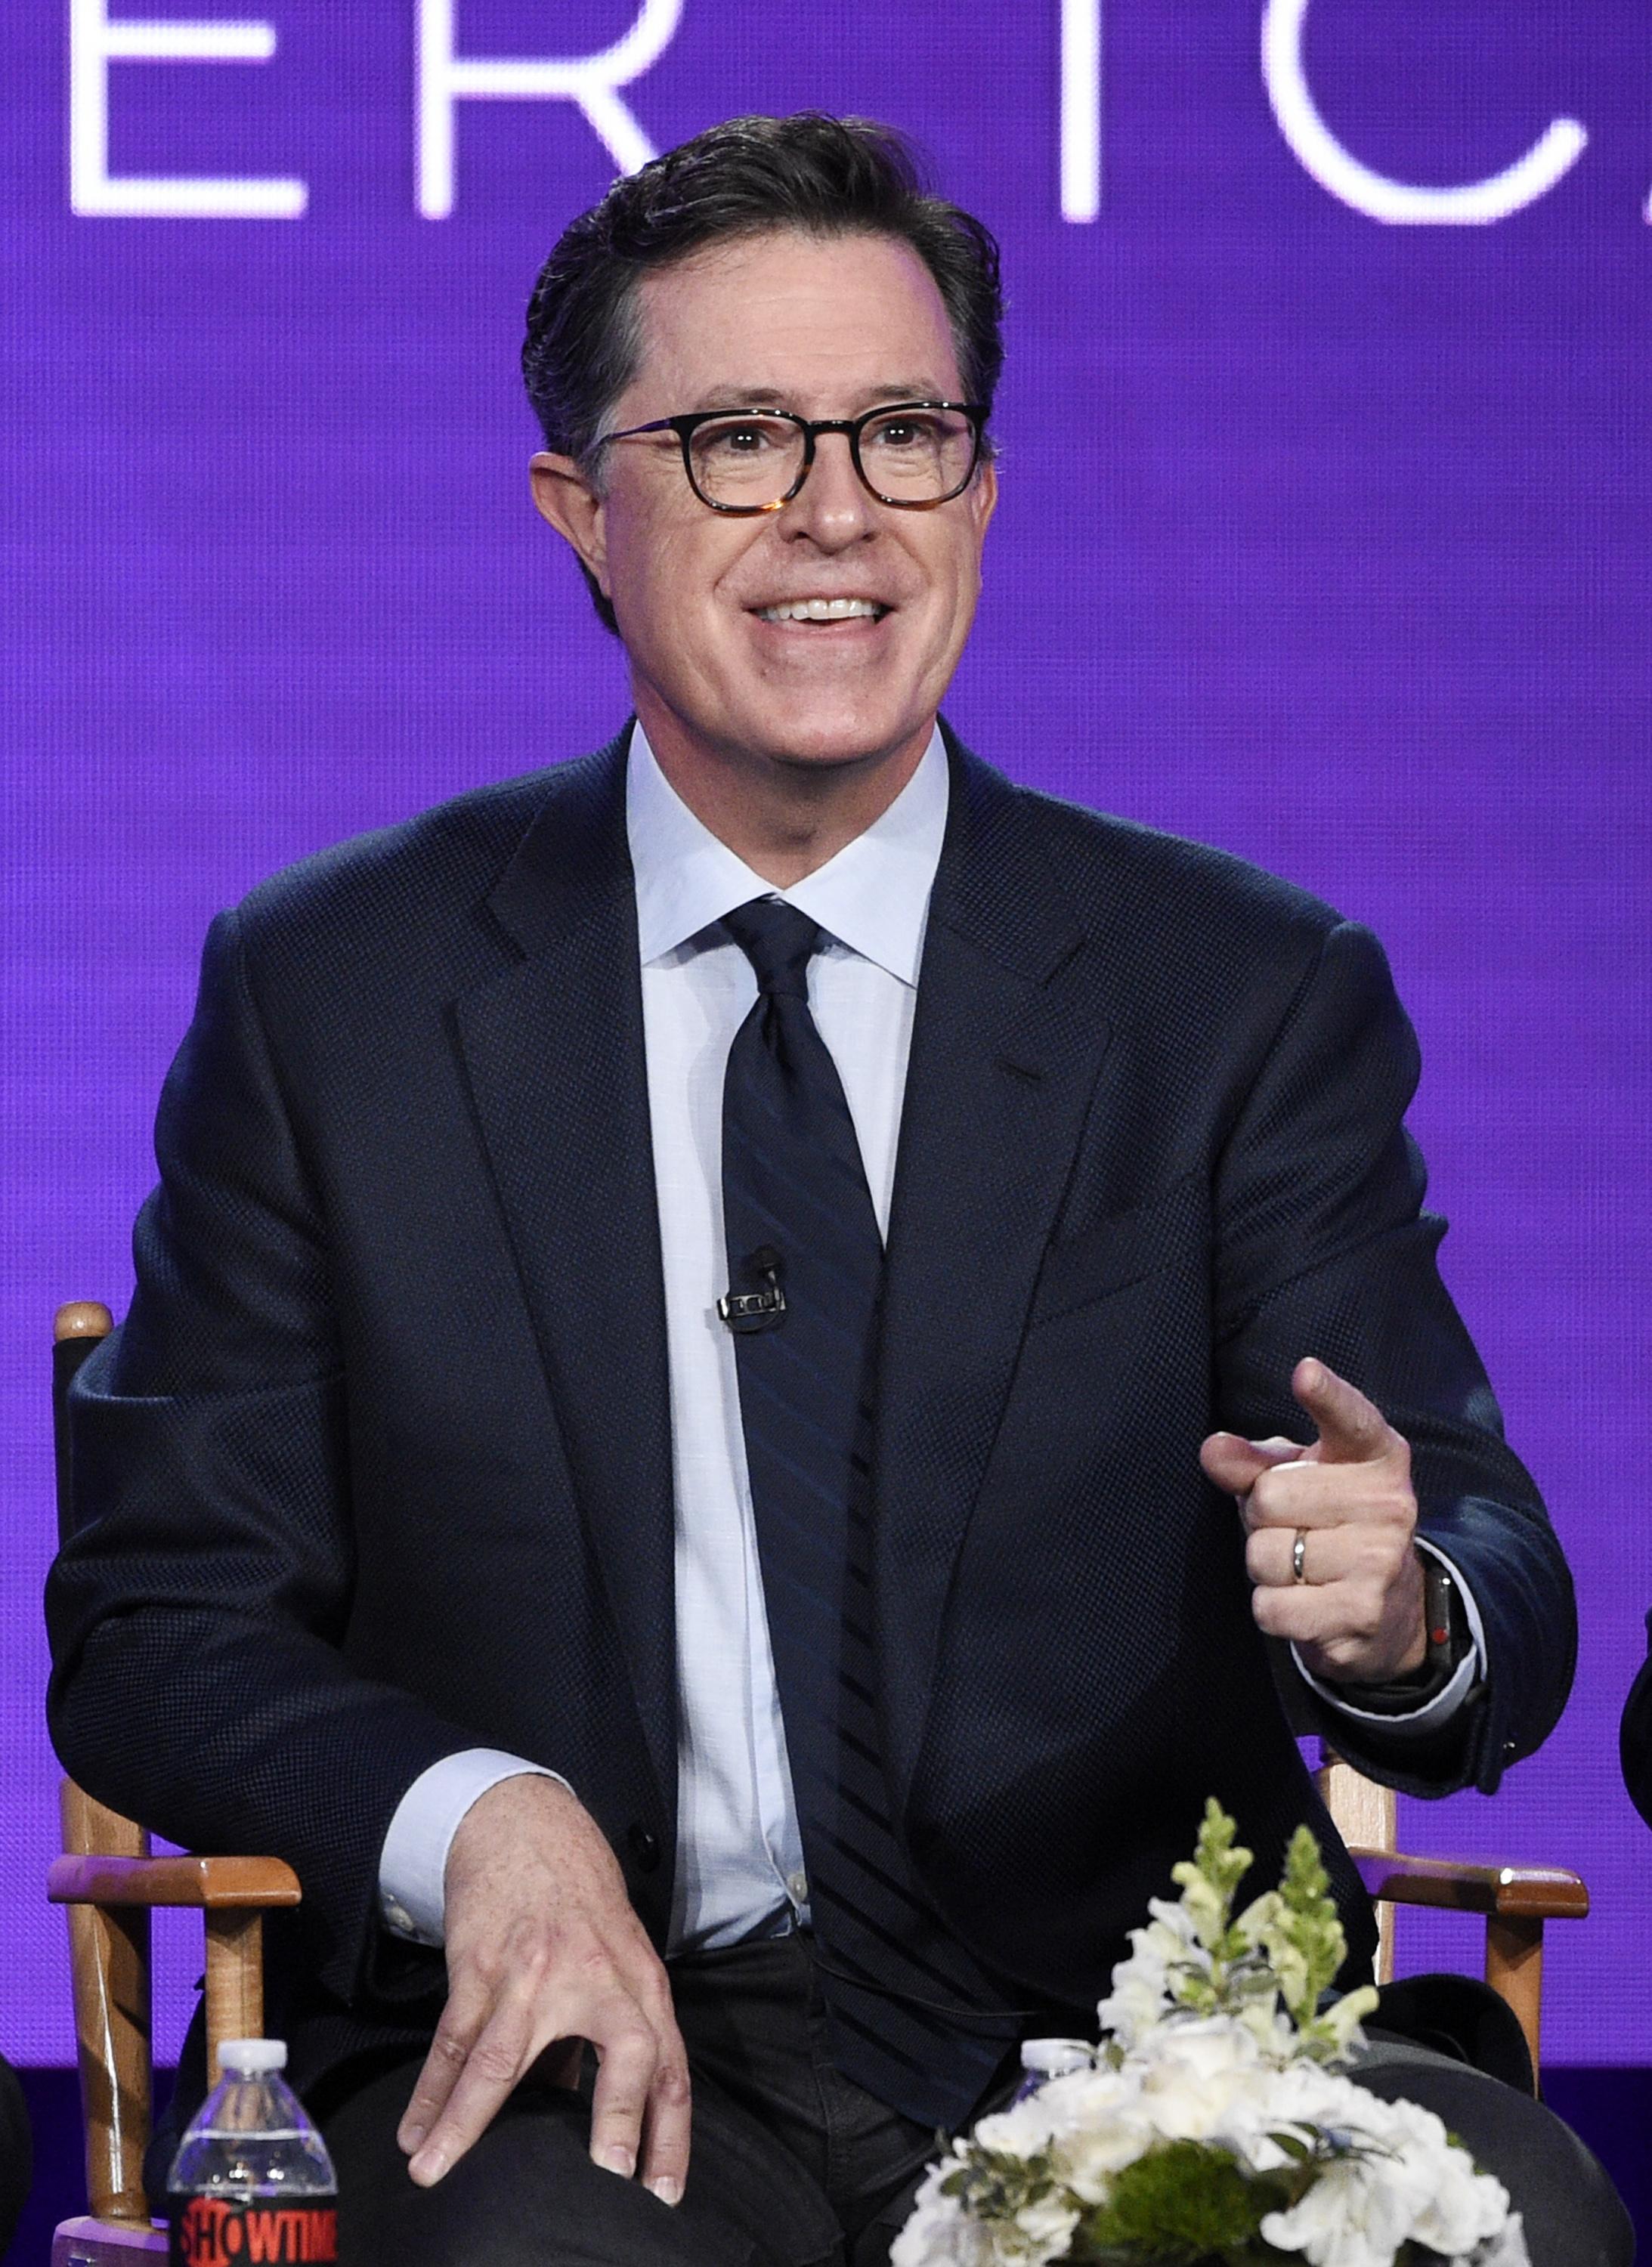 Stephen Colbert to go live again after Trump’s State of the Union | The